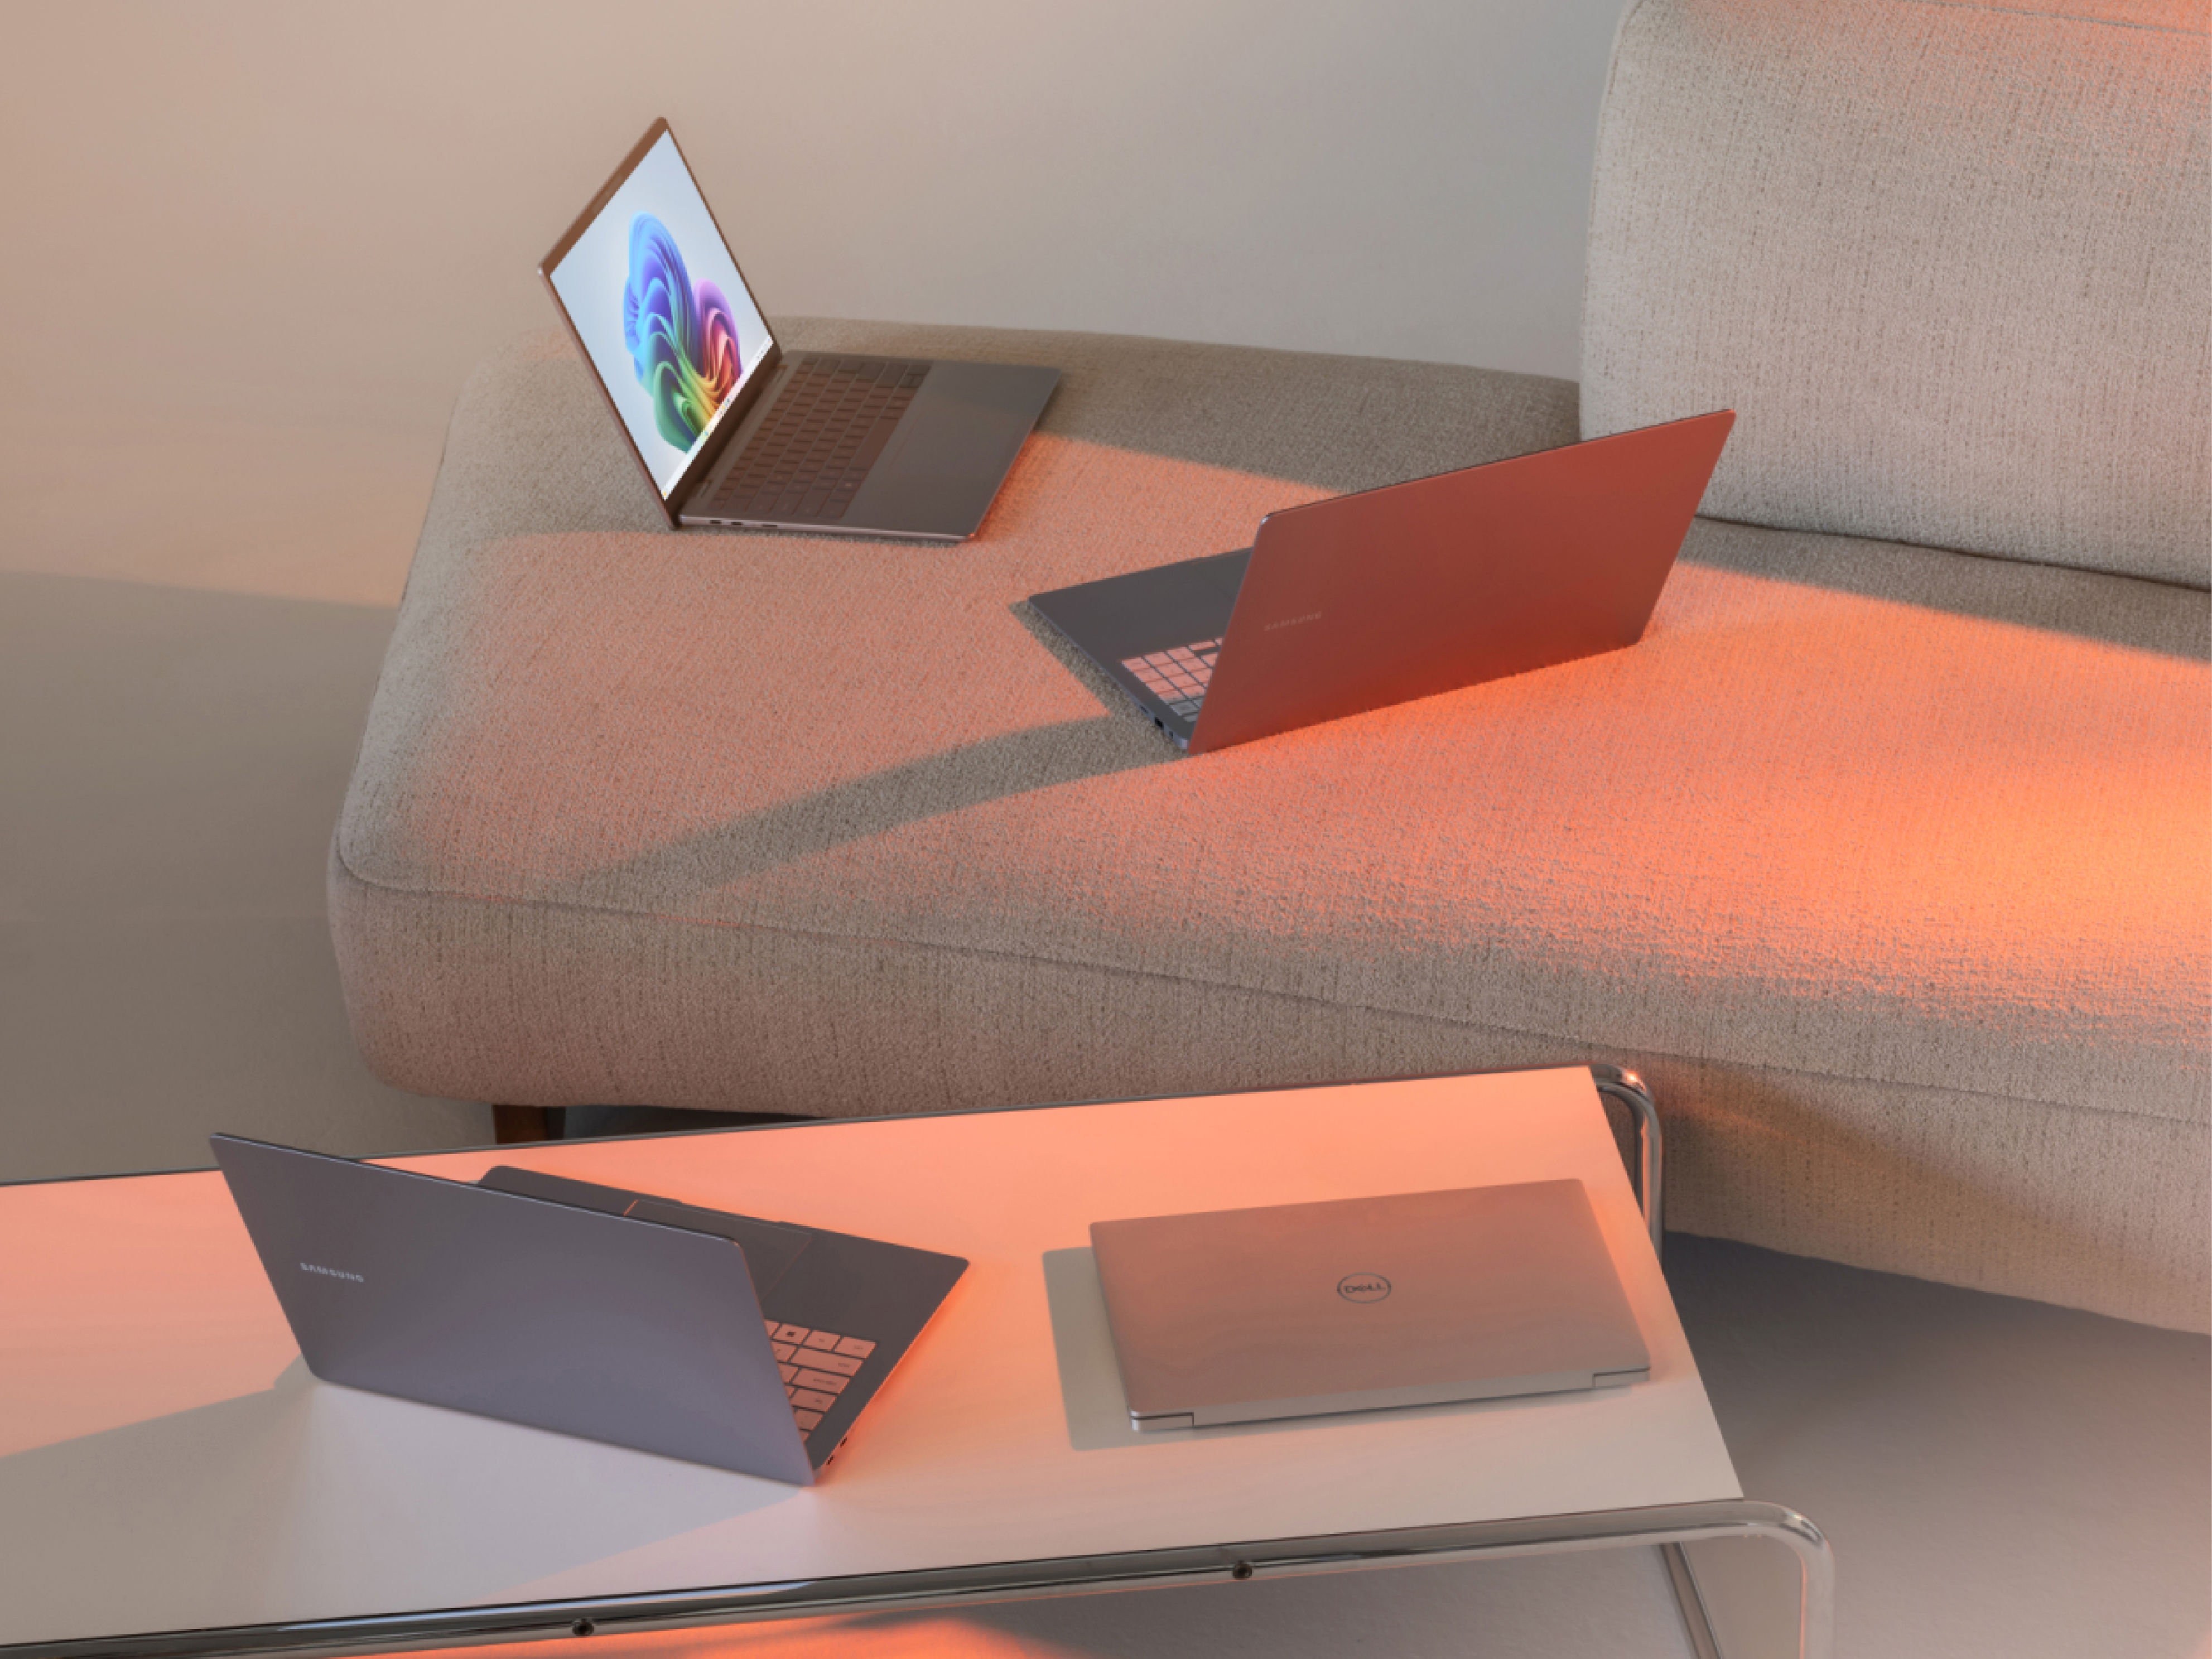 Multiple laptops sitting on a coffee table and sofa